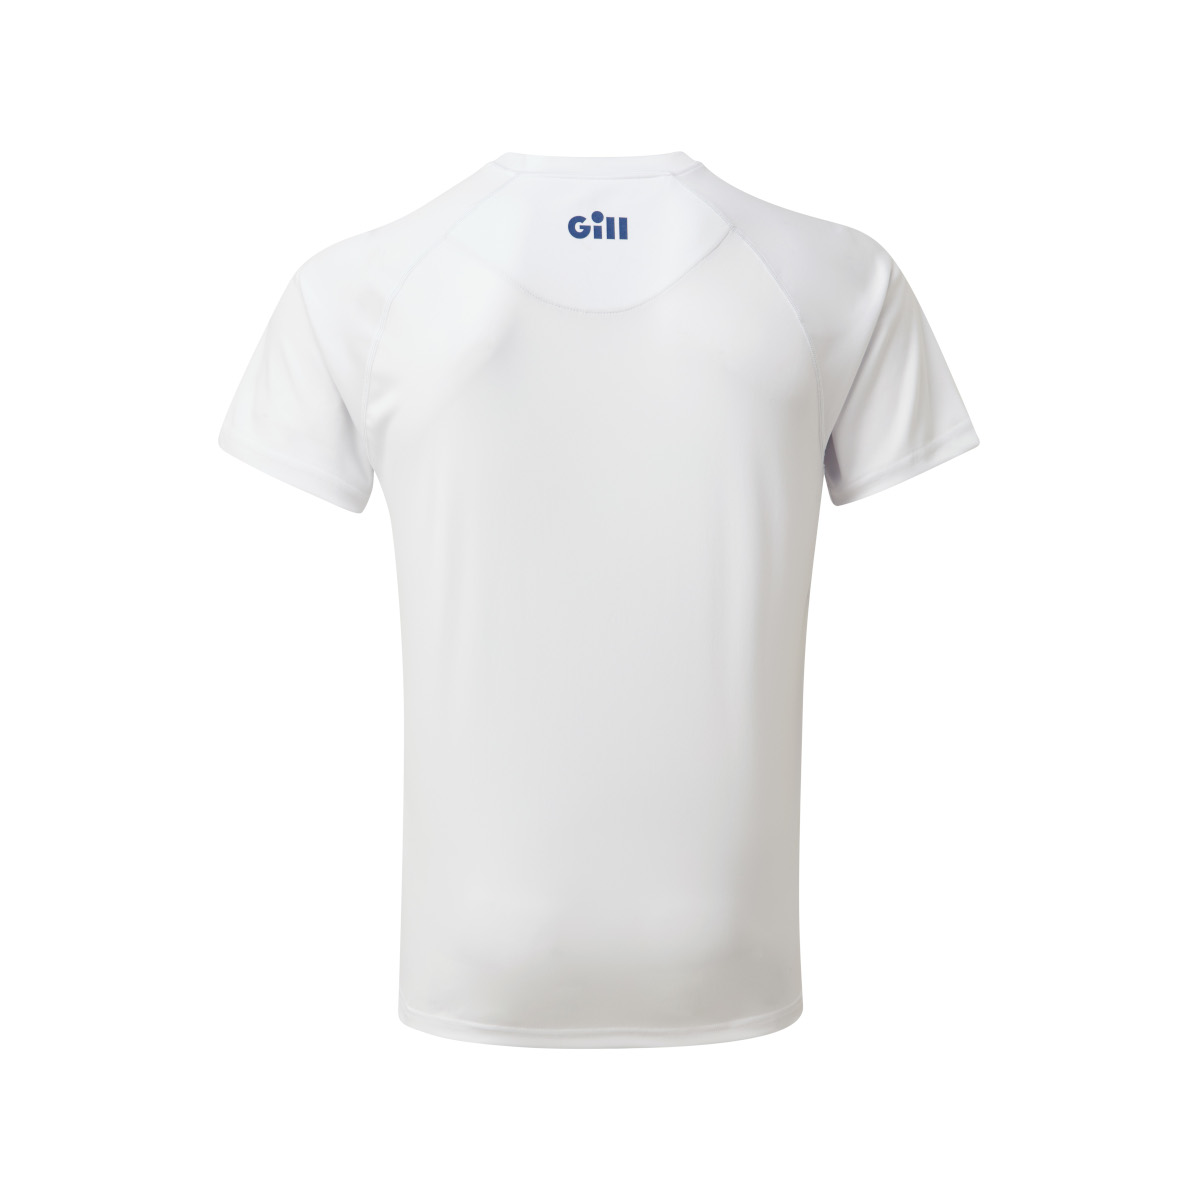 Gill Race t-shirt, homme - blanc, taille XL